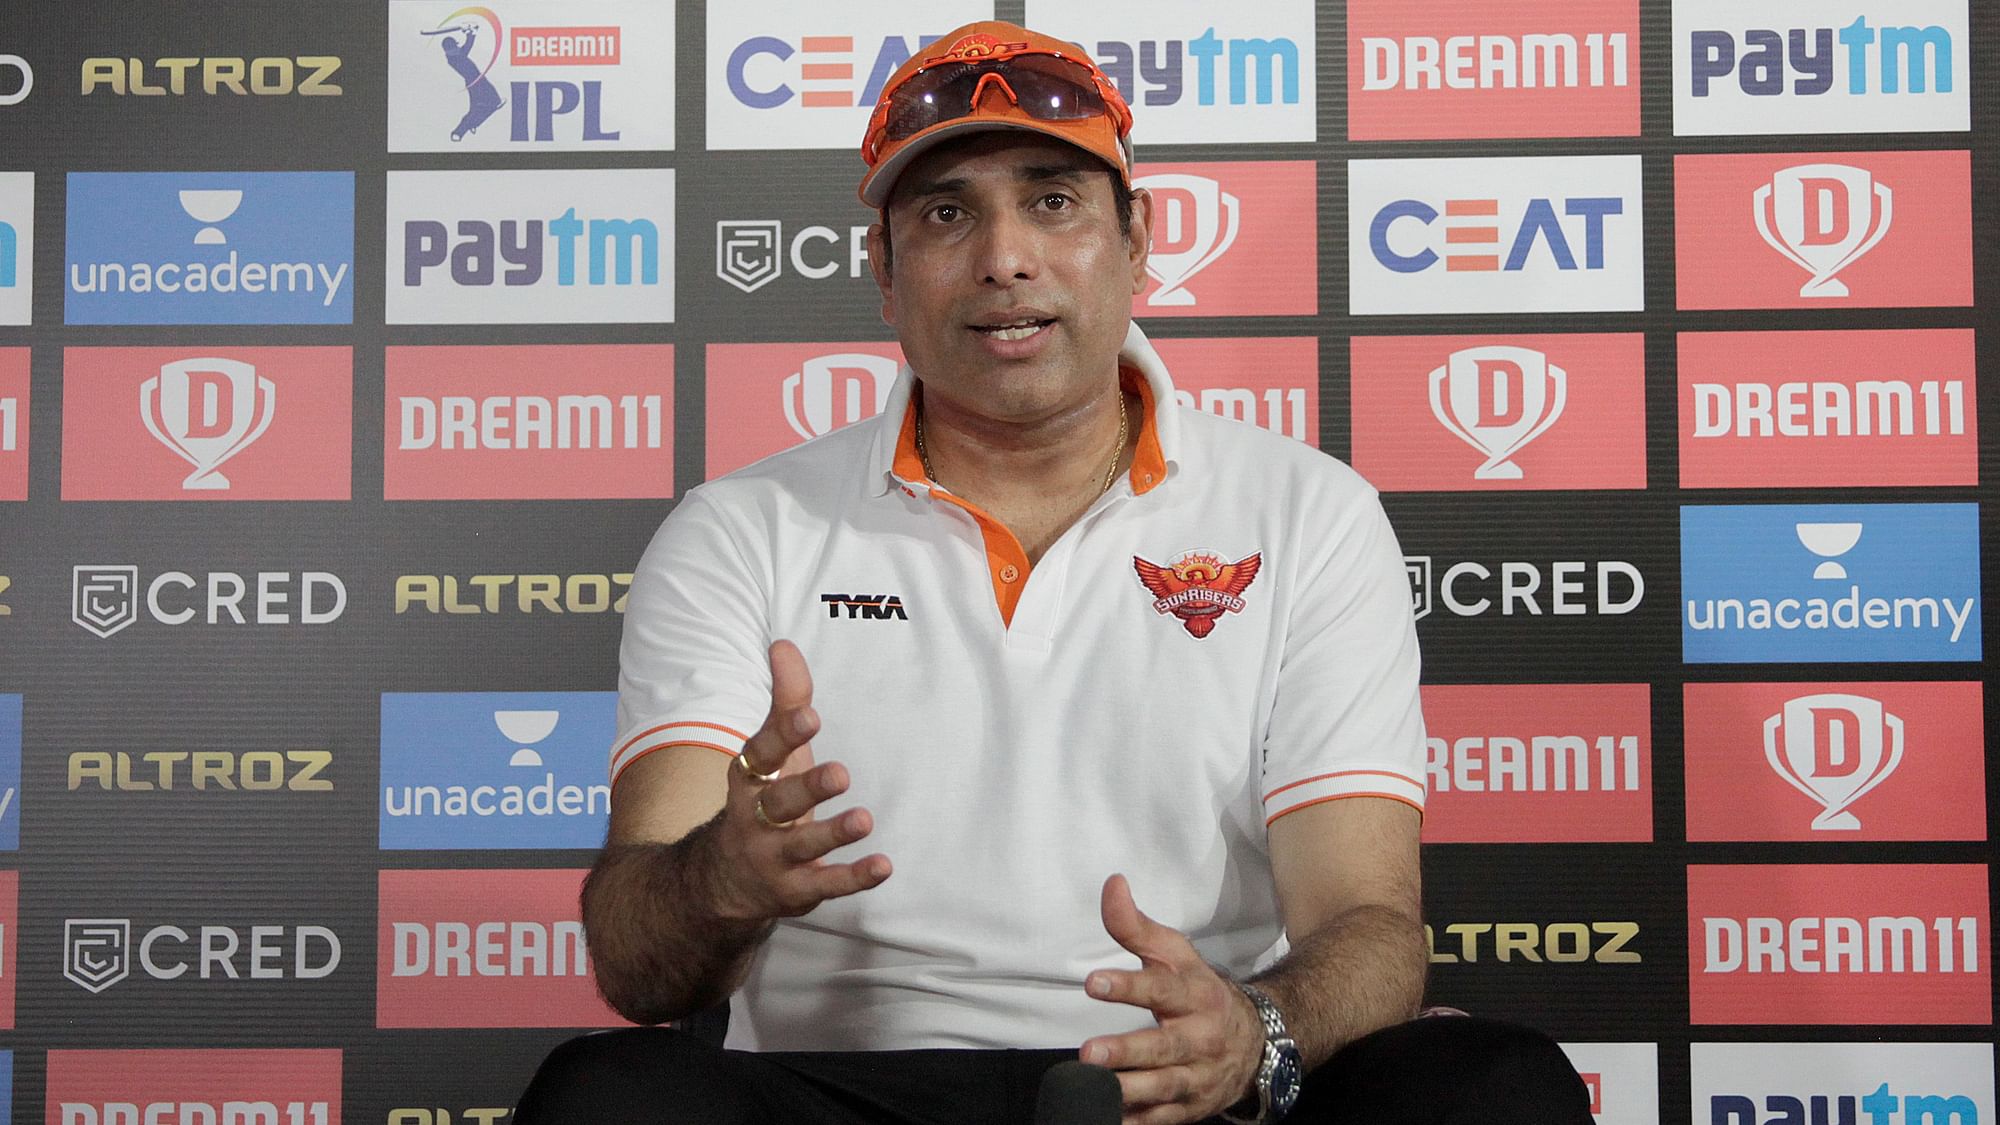 Sunrisers Hyderabad mentor VVS Laxman said that it was good to see the youngsters perform, but they are still searching for best XI.